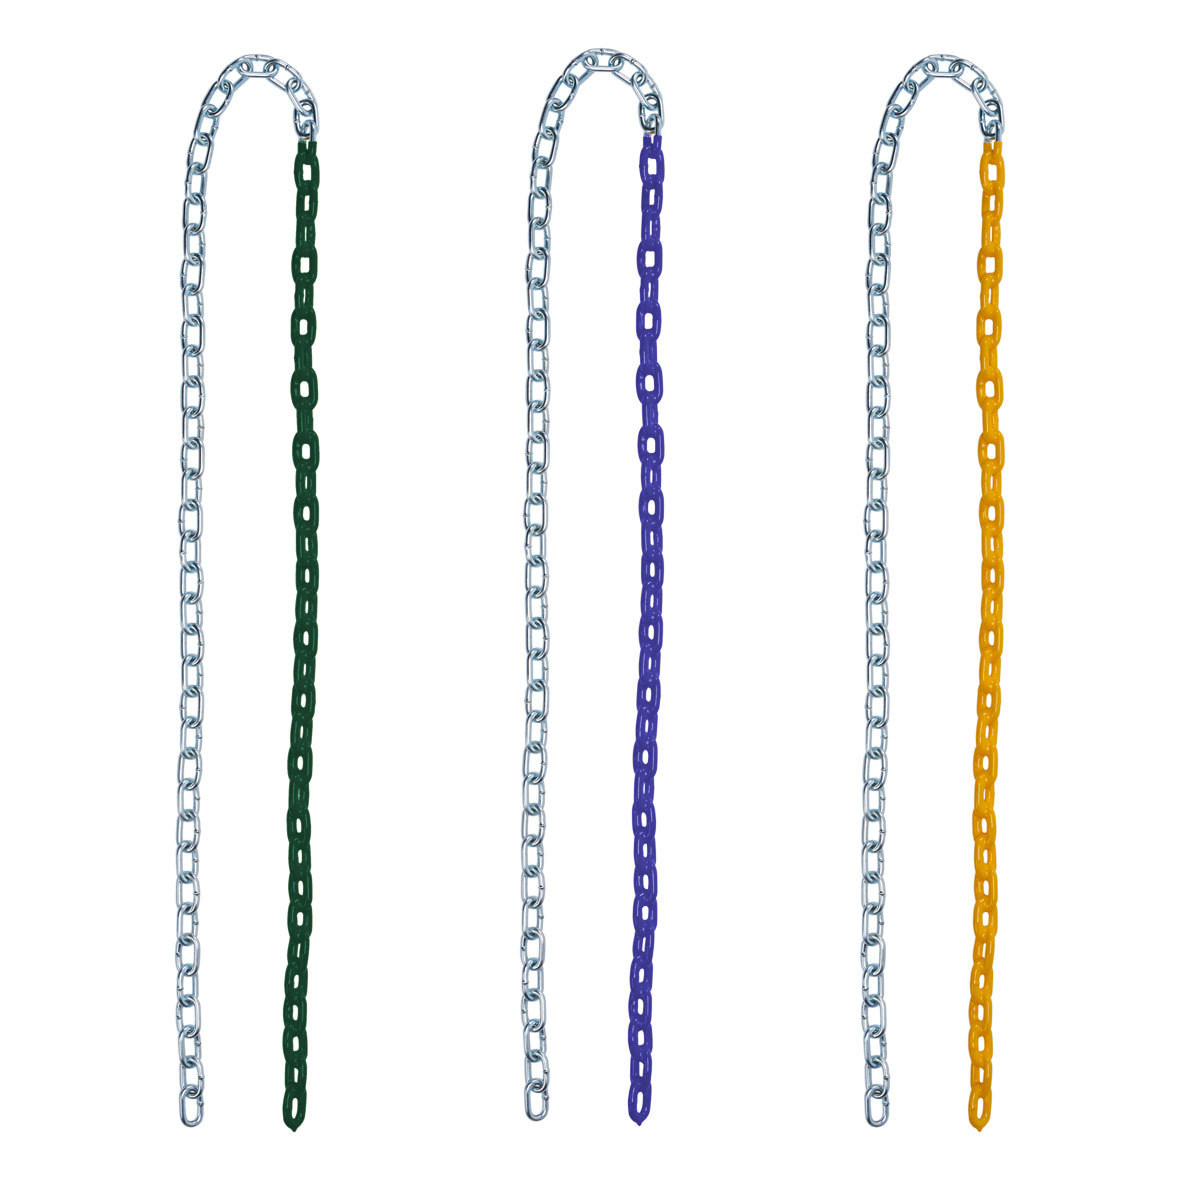 H-55 Partially Coated Plastisol swing chain